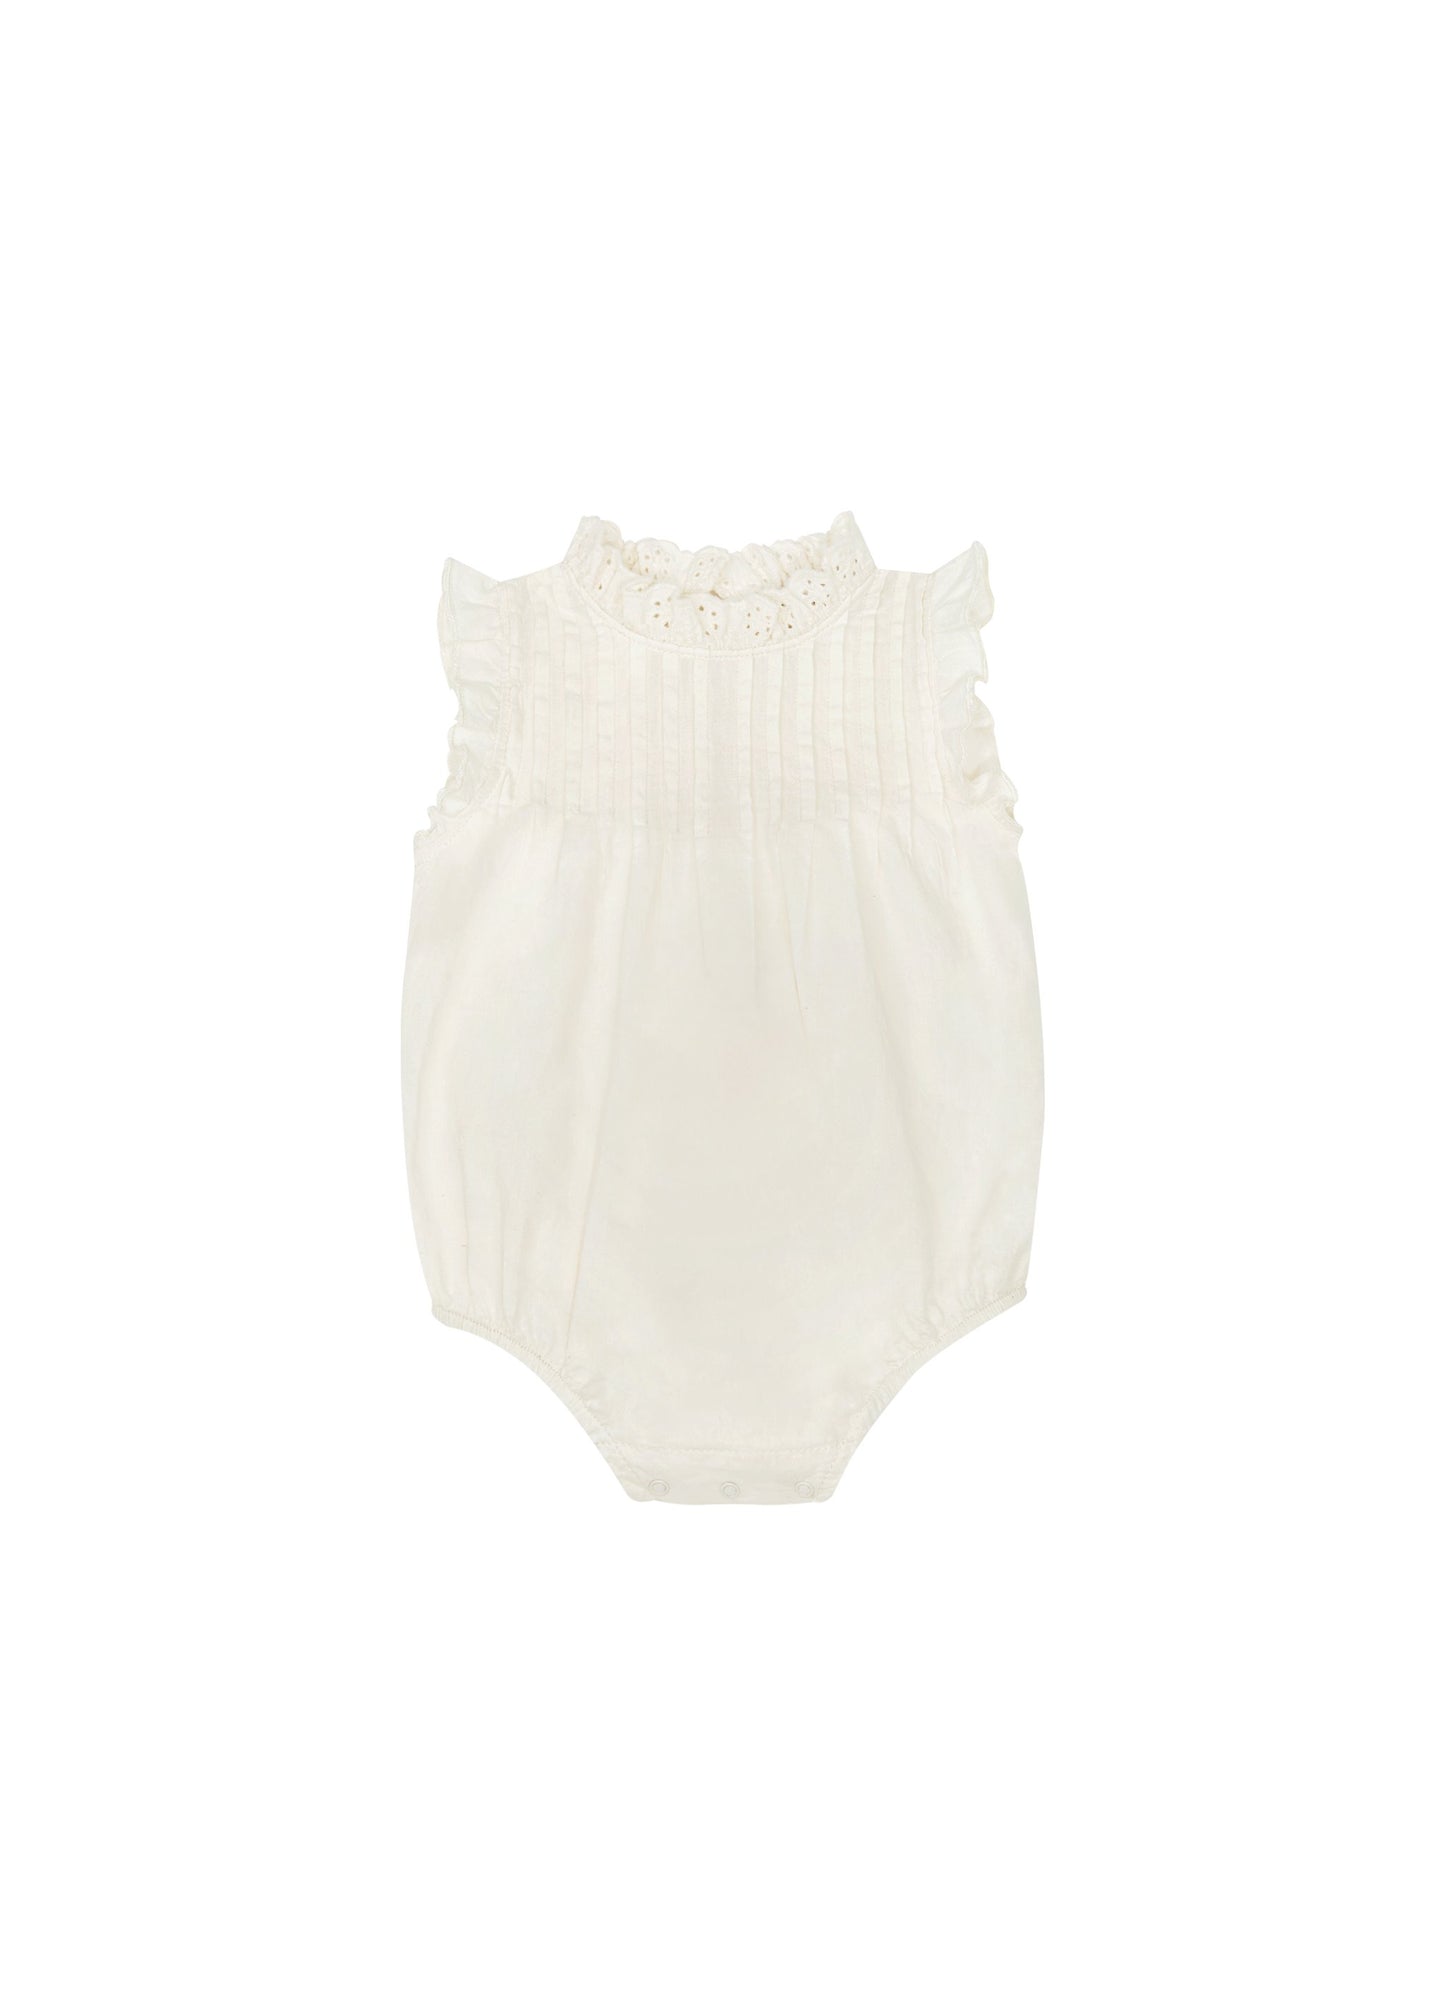 Aura Baby Romper Baby Grows The New Society 